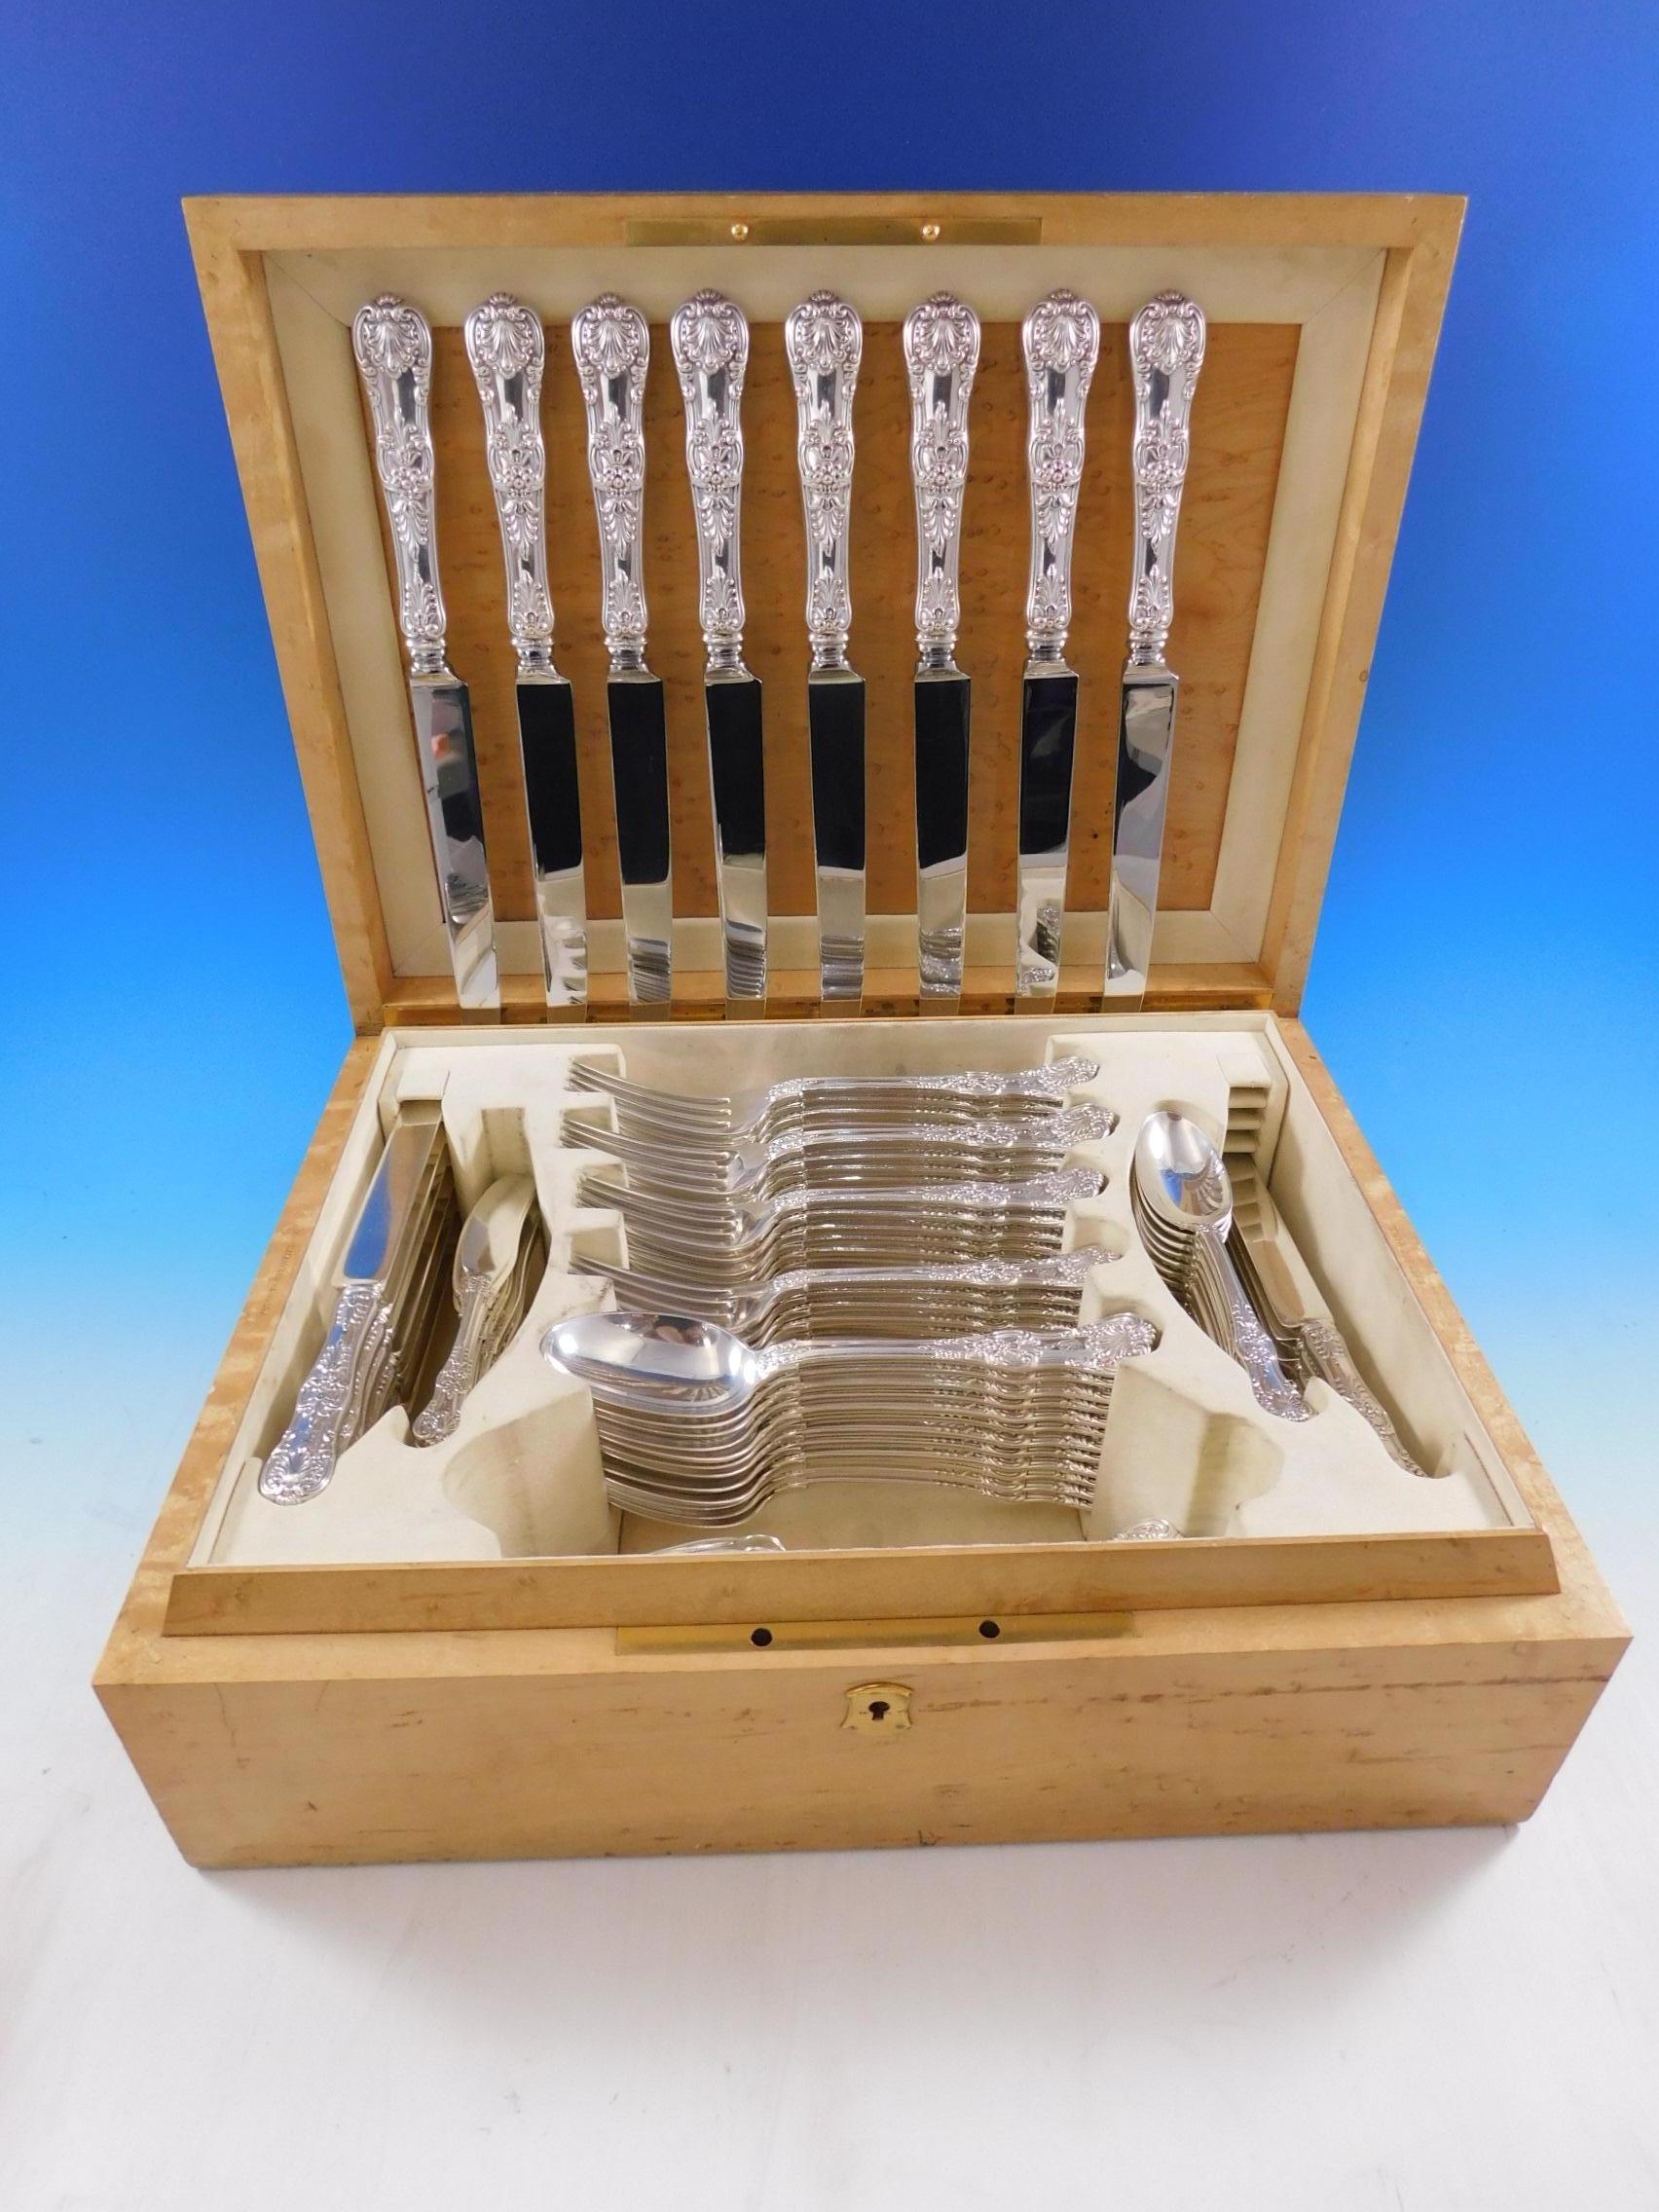 Superb English King by Tiffany & Co. sterling silver flatware set, 100 pieces. This set includes:

8 dinner size knives, 10 1/8